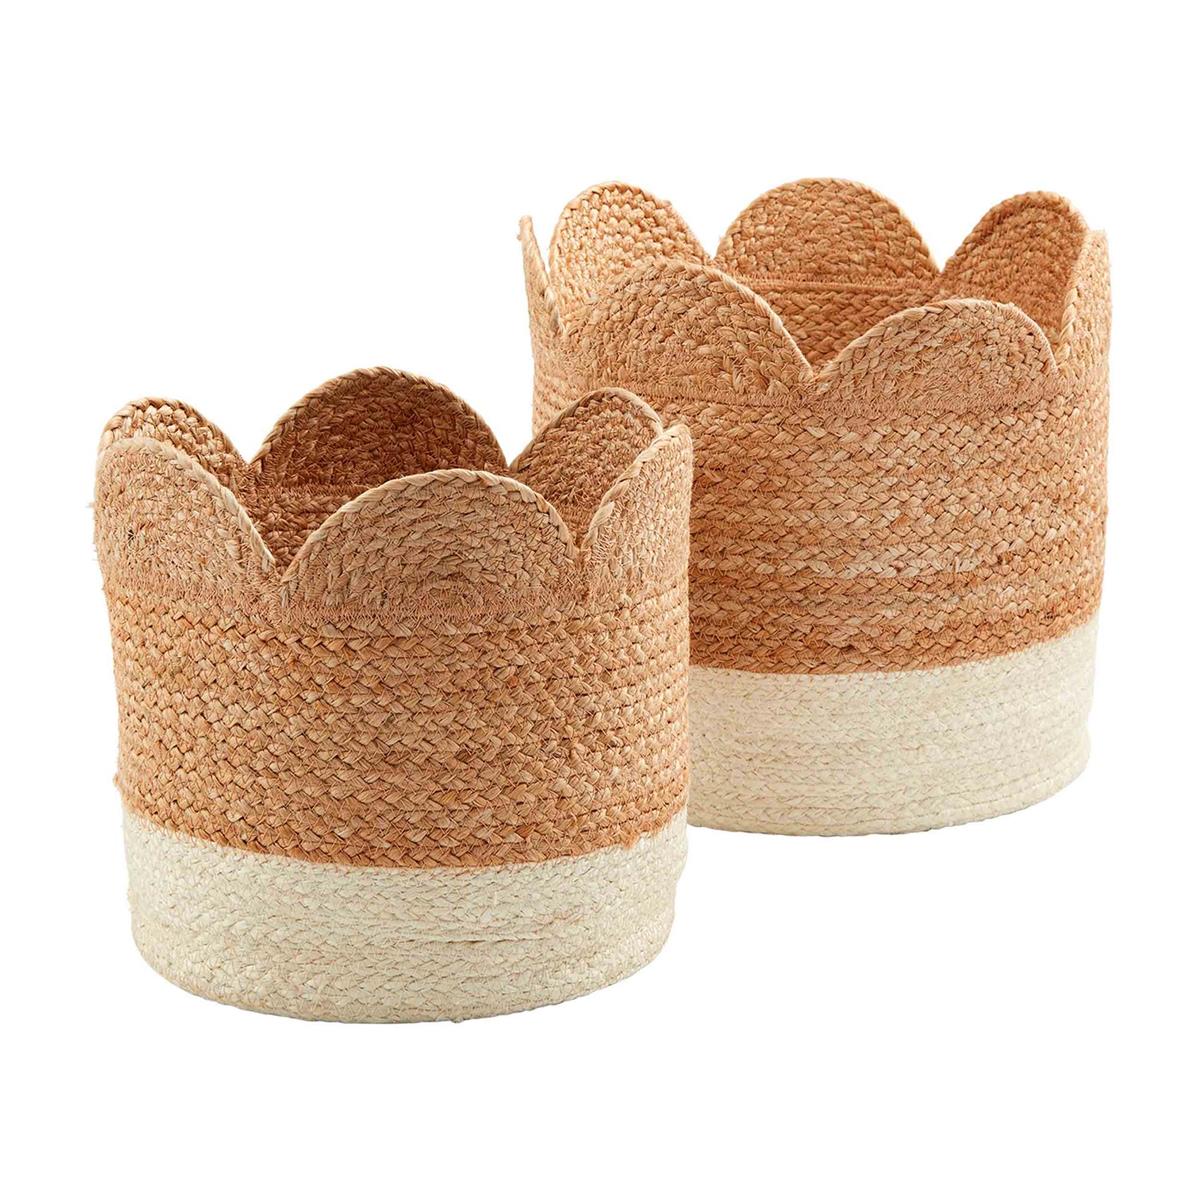 Two-Tone Scalloped Basket Set by Mud Pie